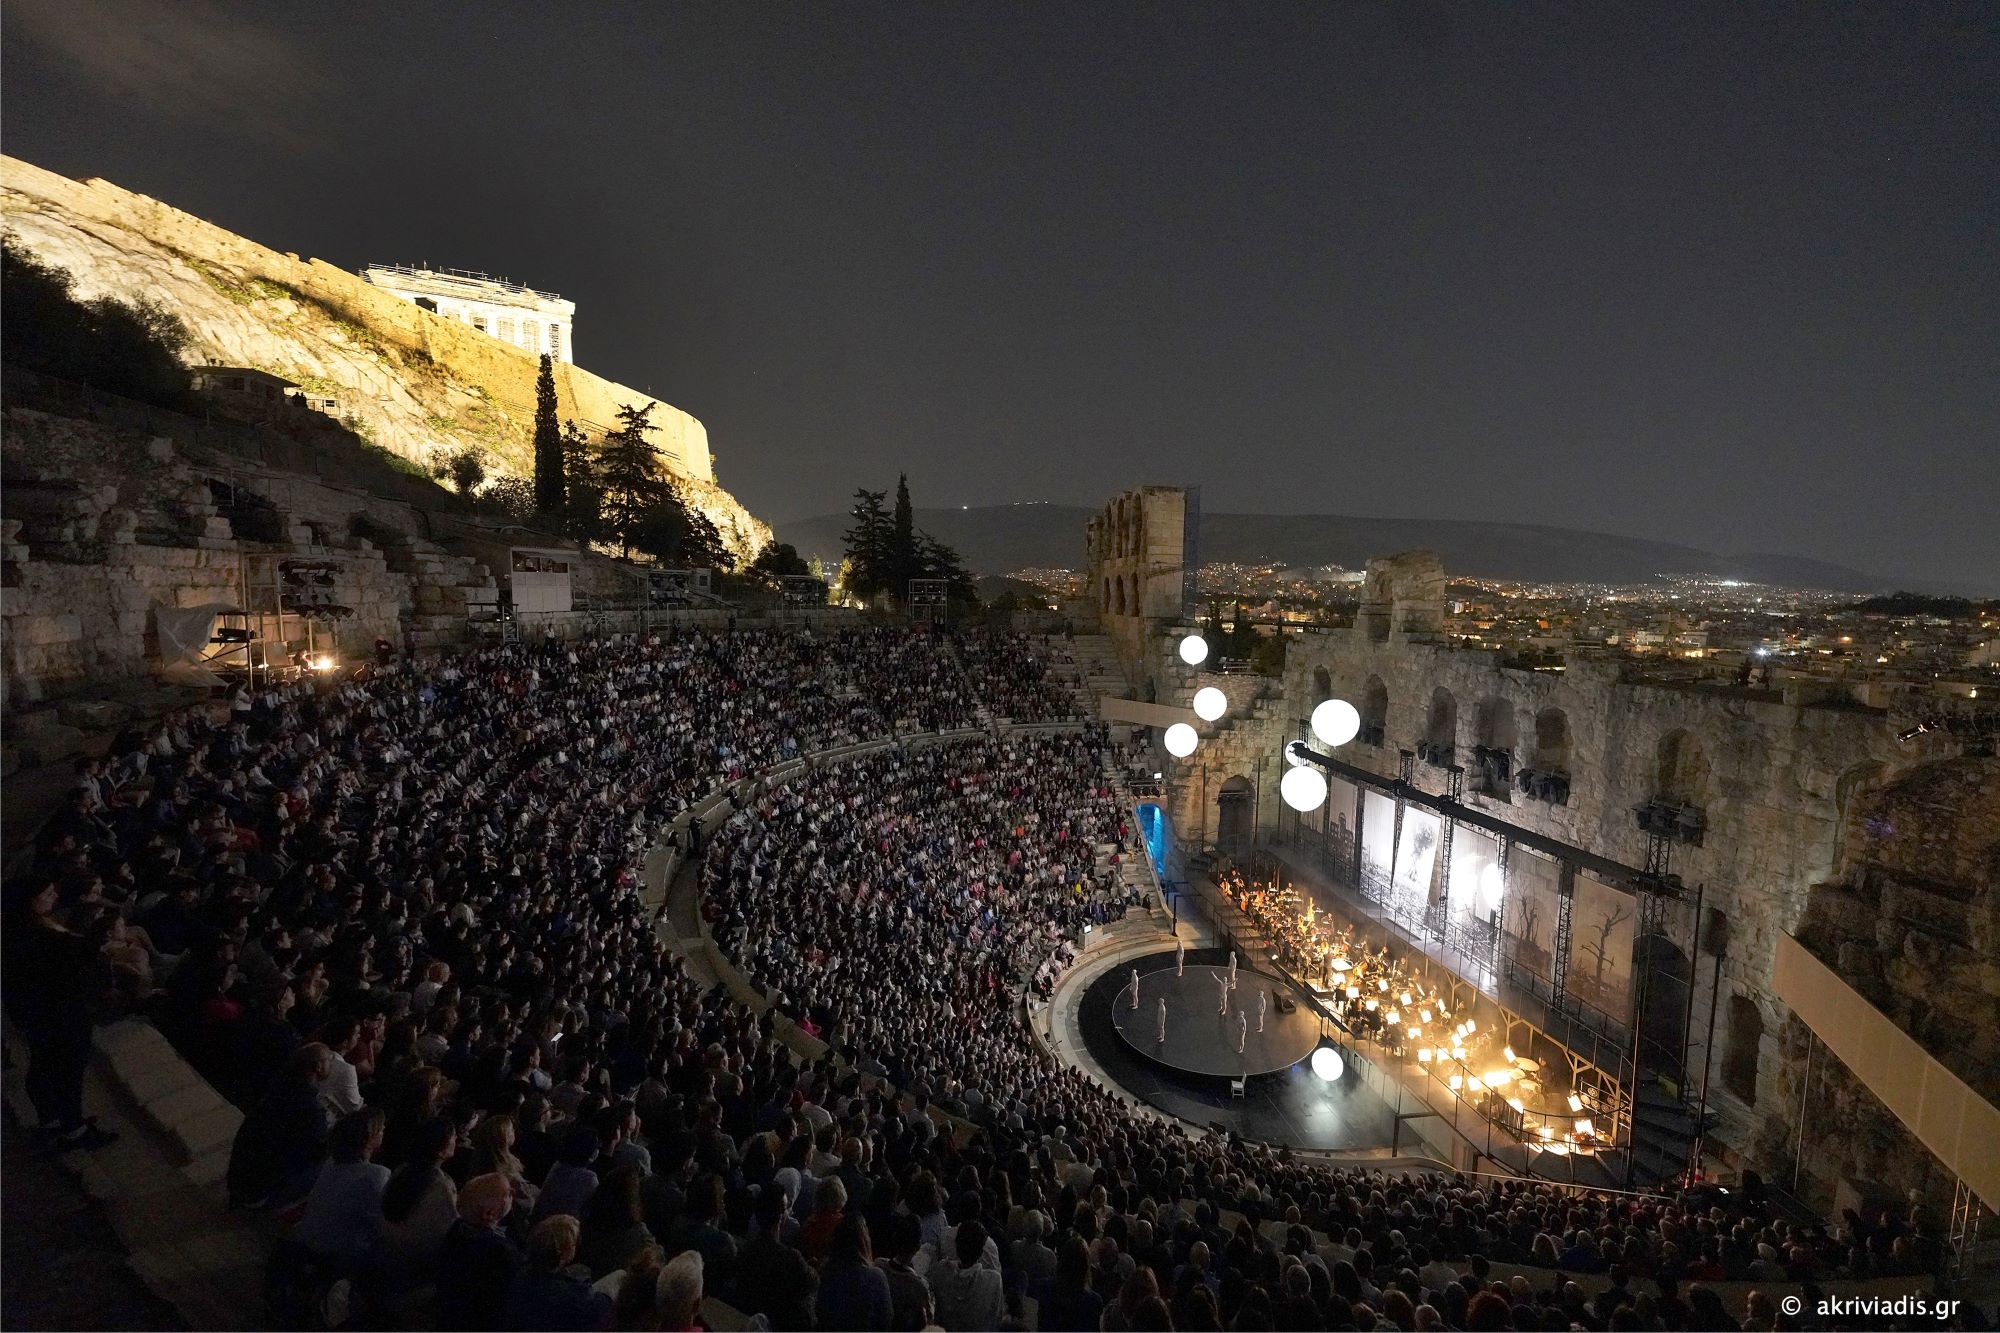 Madama Butterfly by Giacomo Puccini. Conductor: Vassilis Christopoulos, stage direction: Olivier Py, sets and costumes: Pierre-André Weitz, Odeon of Herodes Atticus (2023), photo by Haris Akriviadis 